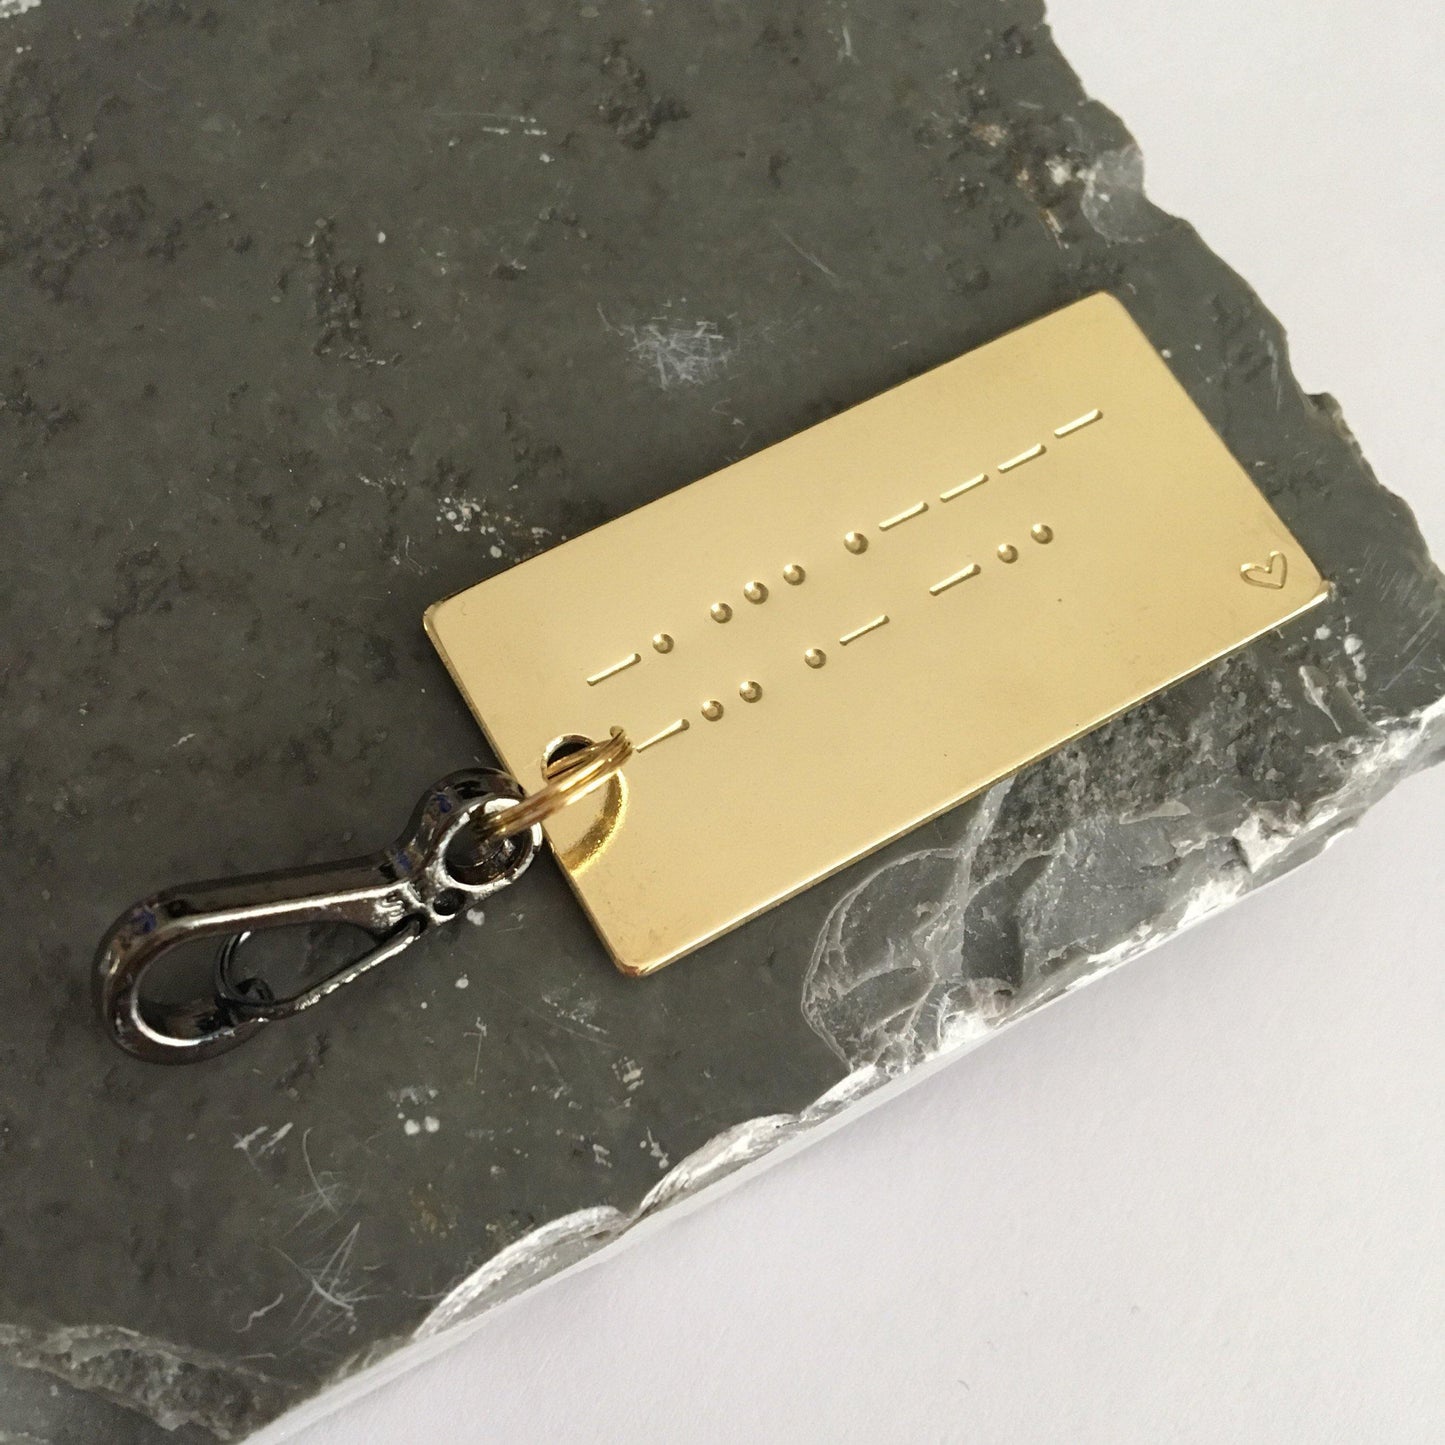 Morse Code Keyring, Morse Code, Secret Message Keyring, Personalised Keychain, Hand Stamped, Gift for Him - The Little Stamping Co.